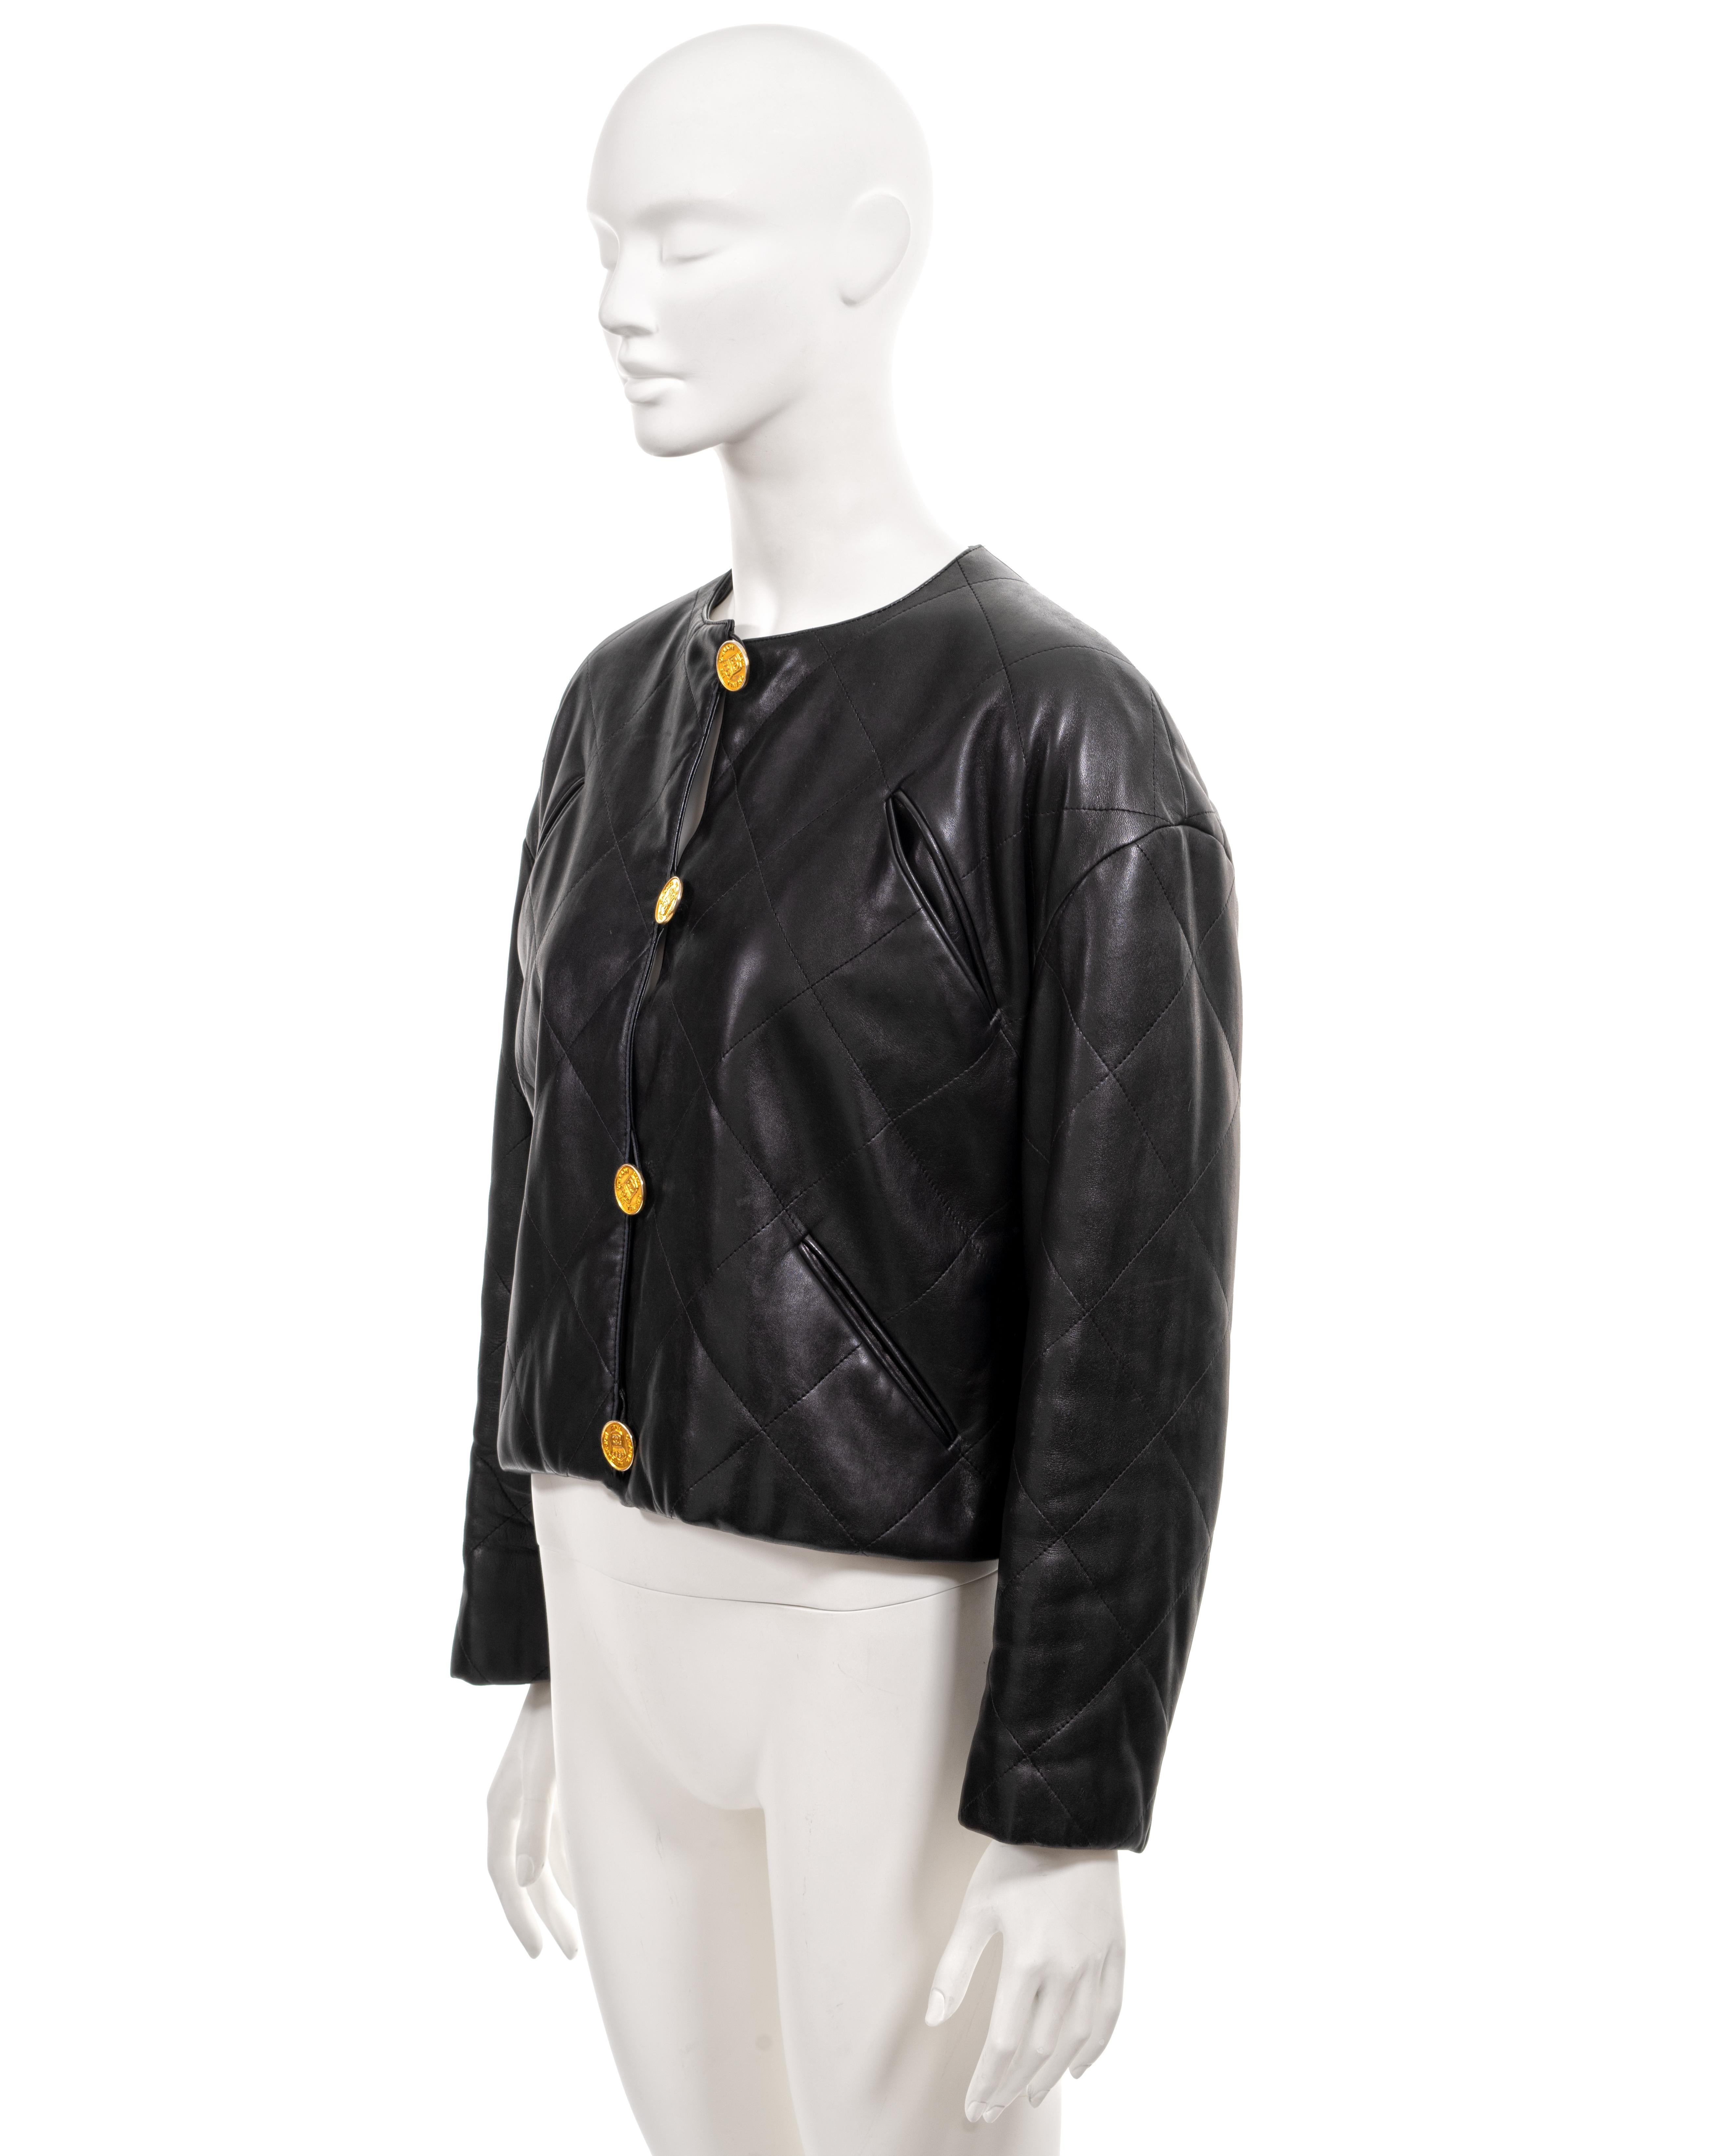 Chanel by Karl Lagerfeld black quilted lambskin leather jacket, fw 1987 7